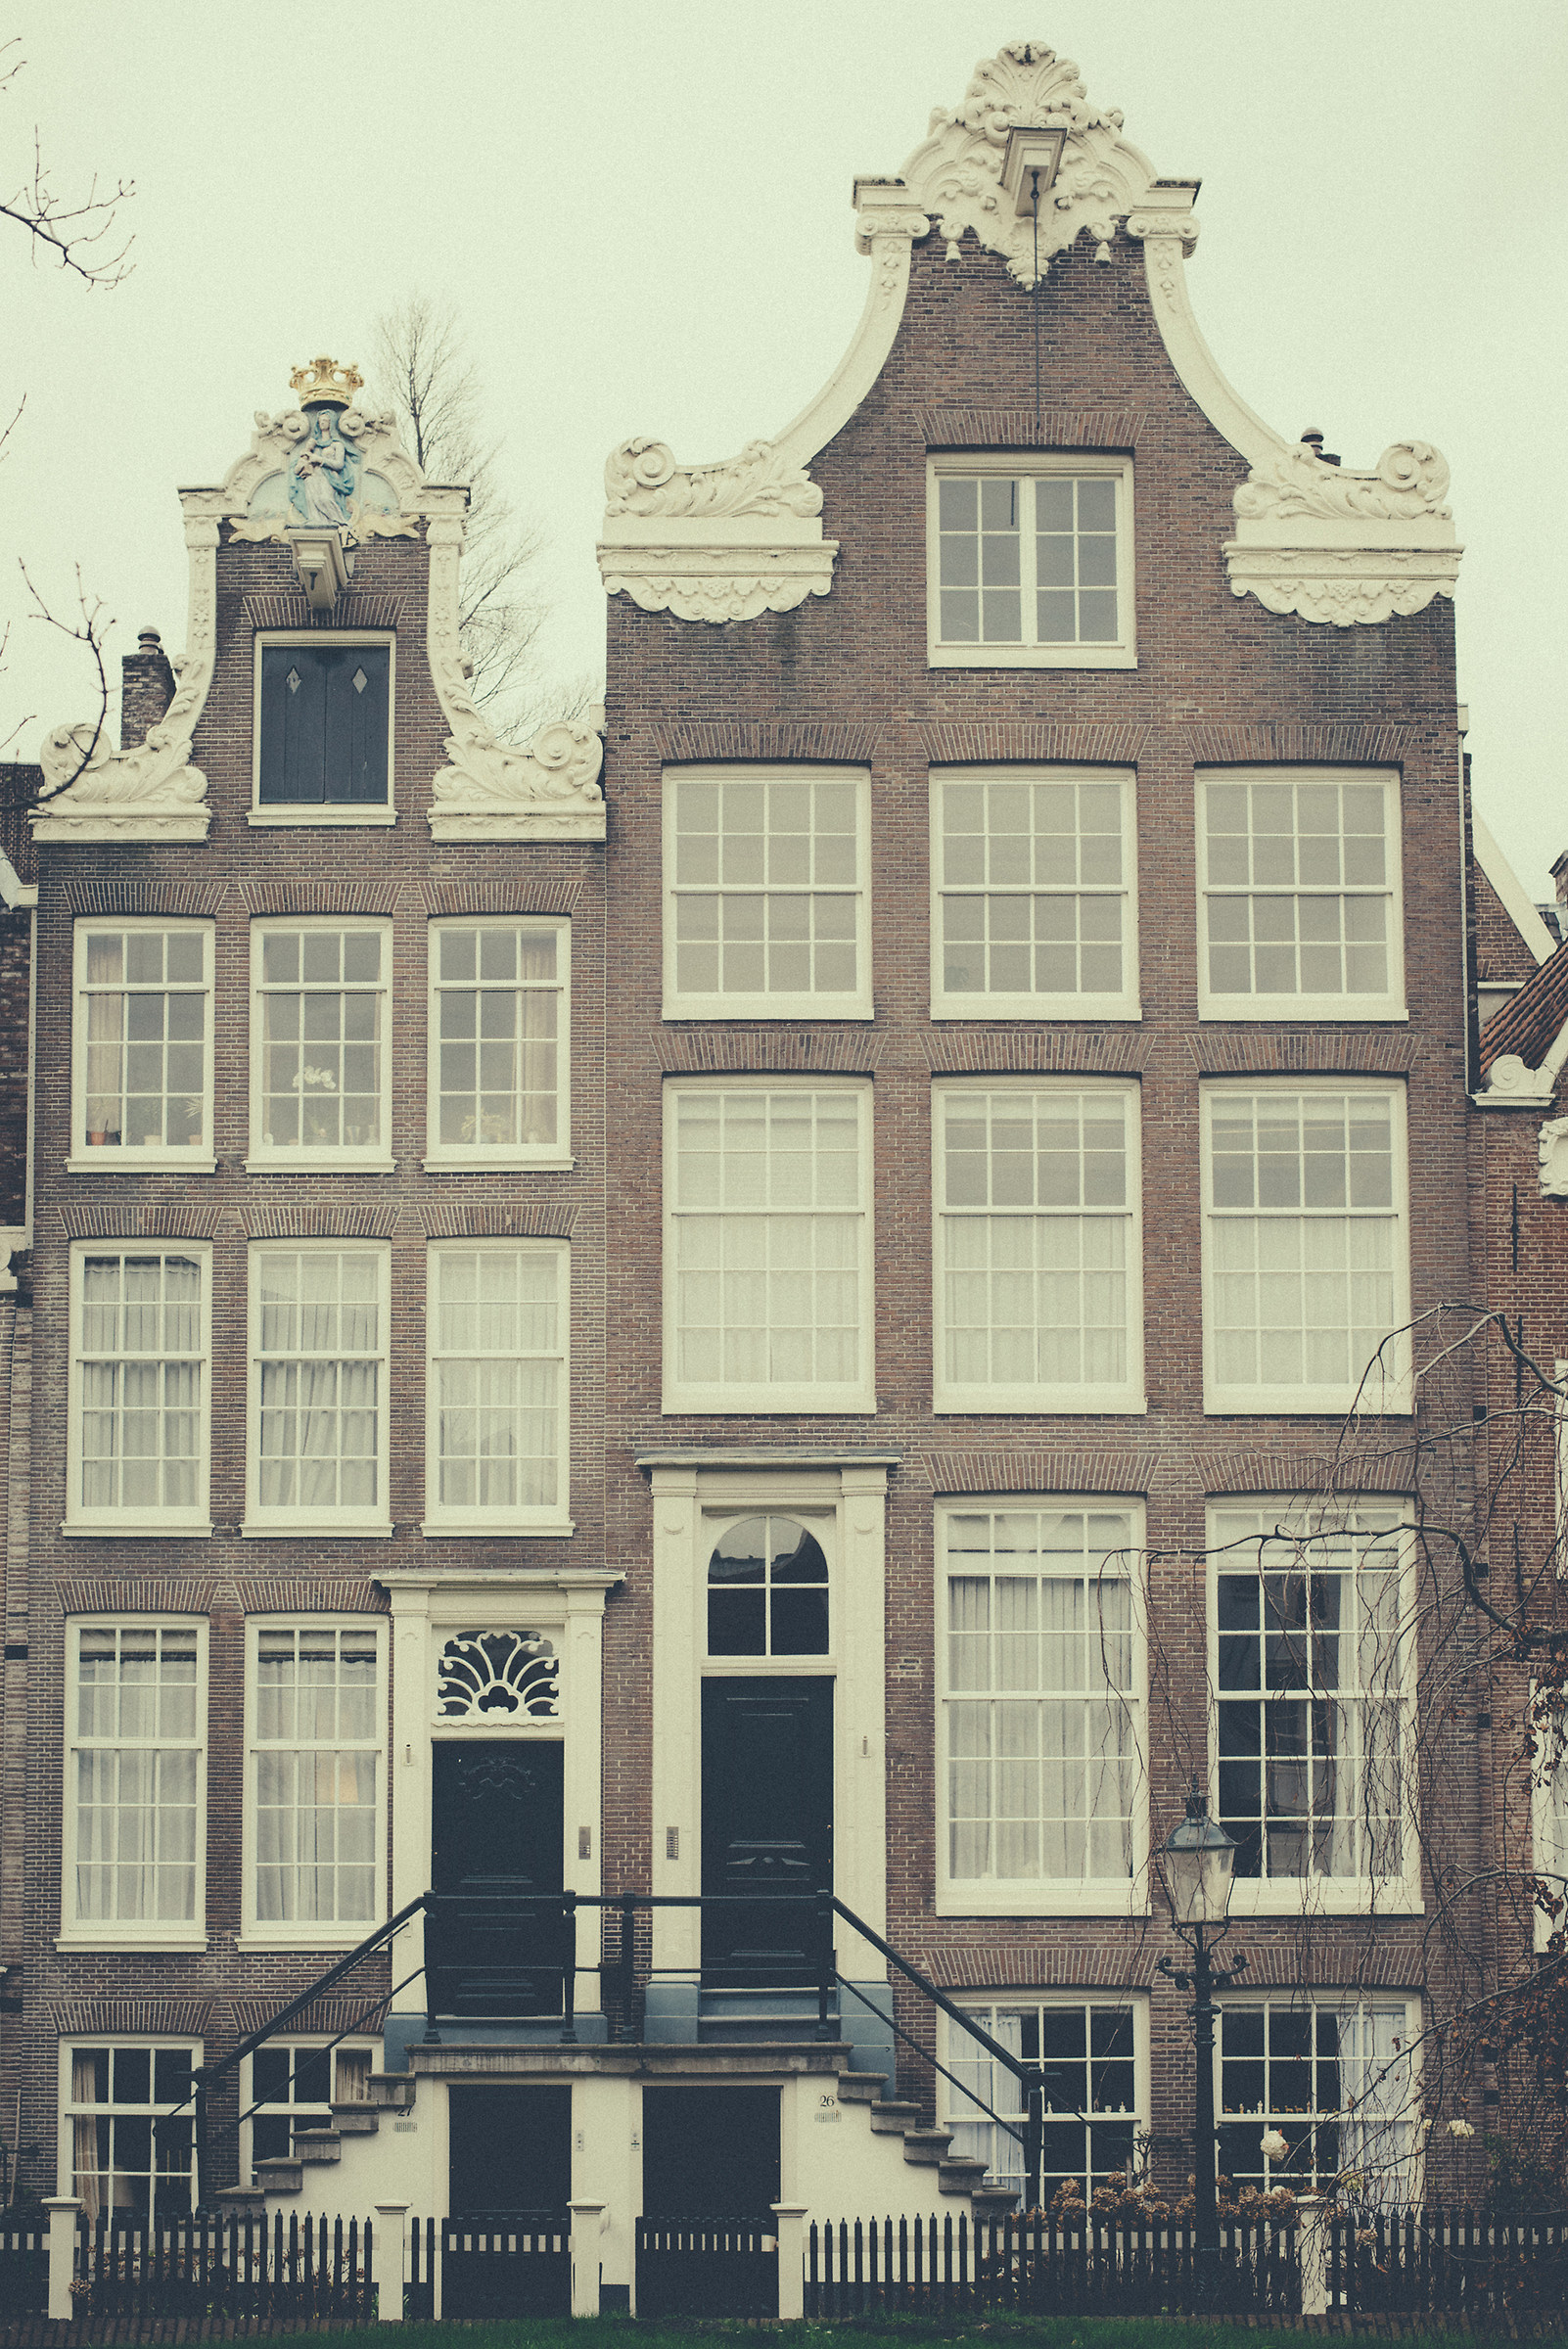 Amsterdam houses revisited...